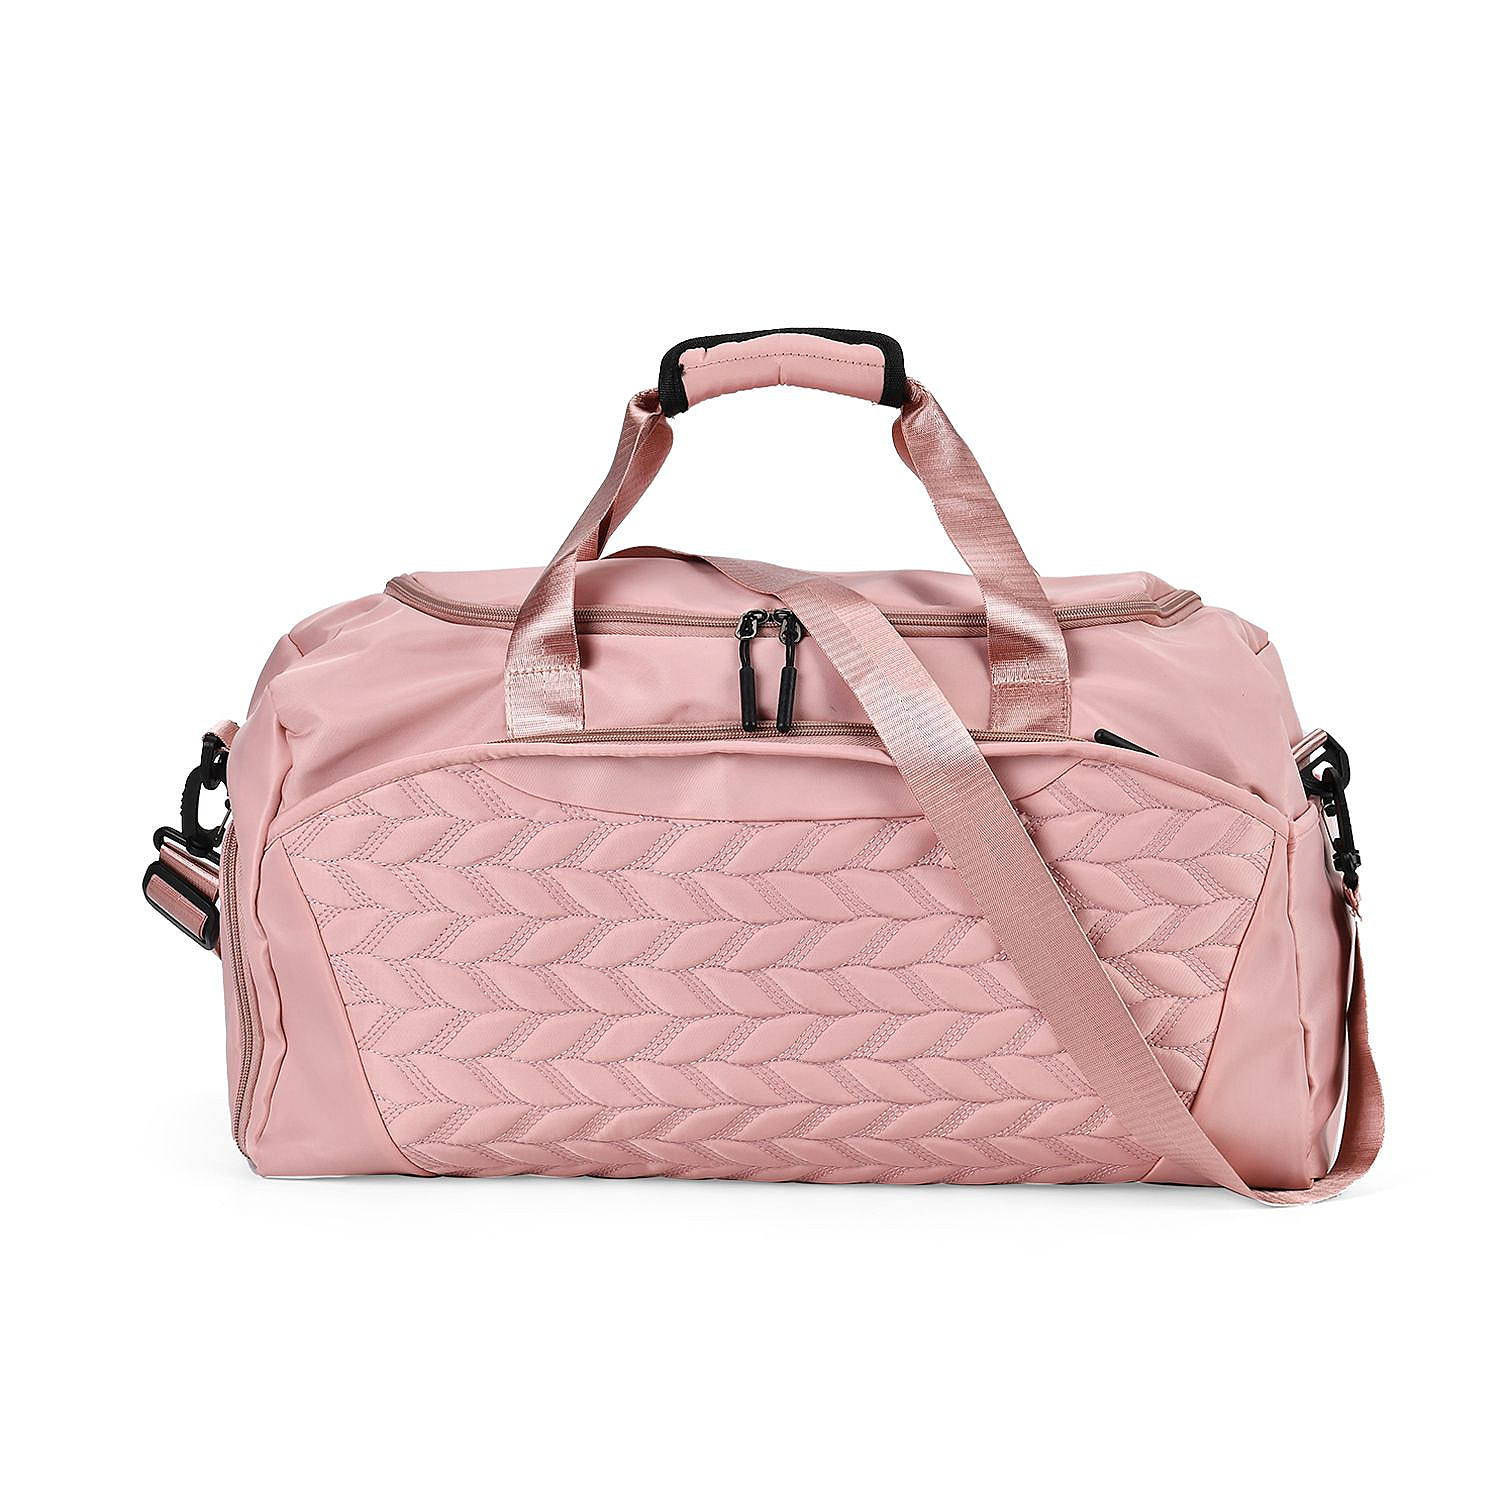 Travel Duffle Bag with Quilted Leaves Pattern - Pink